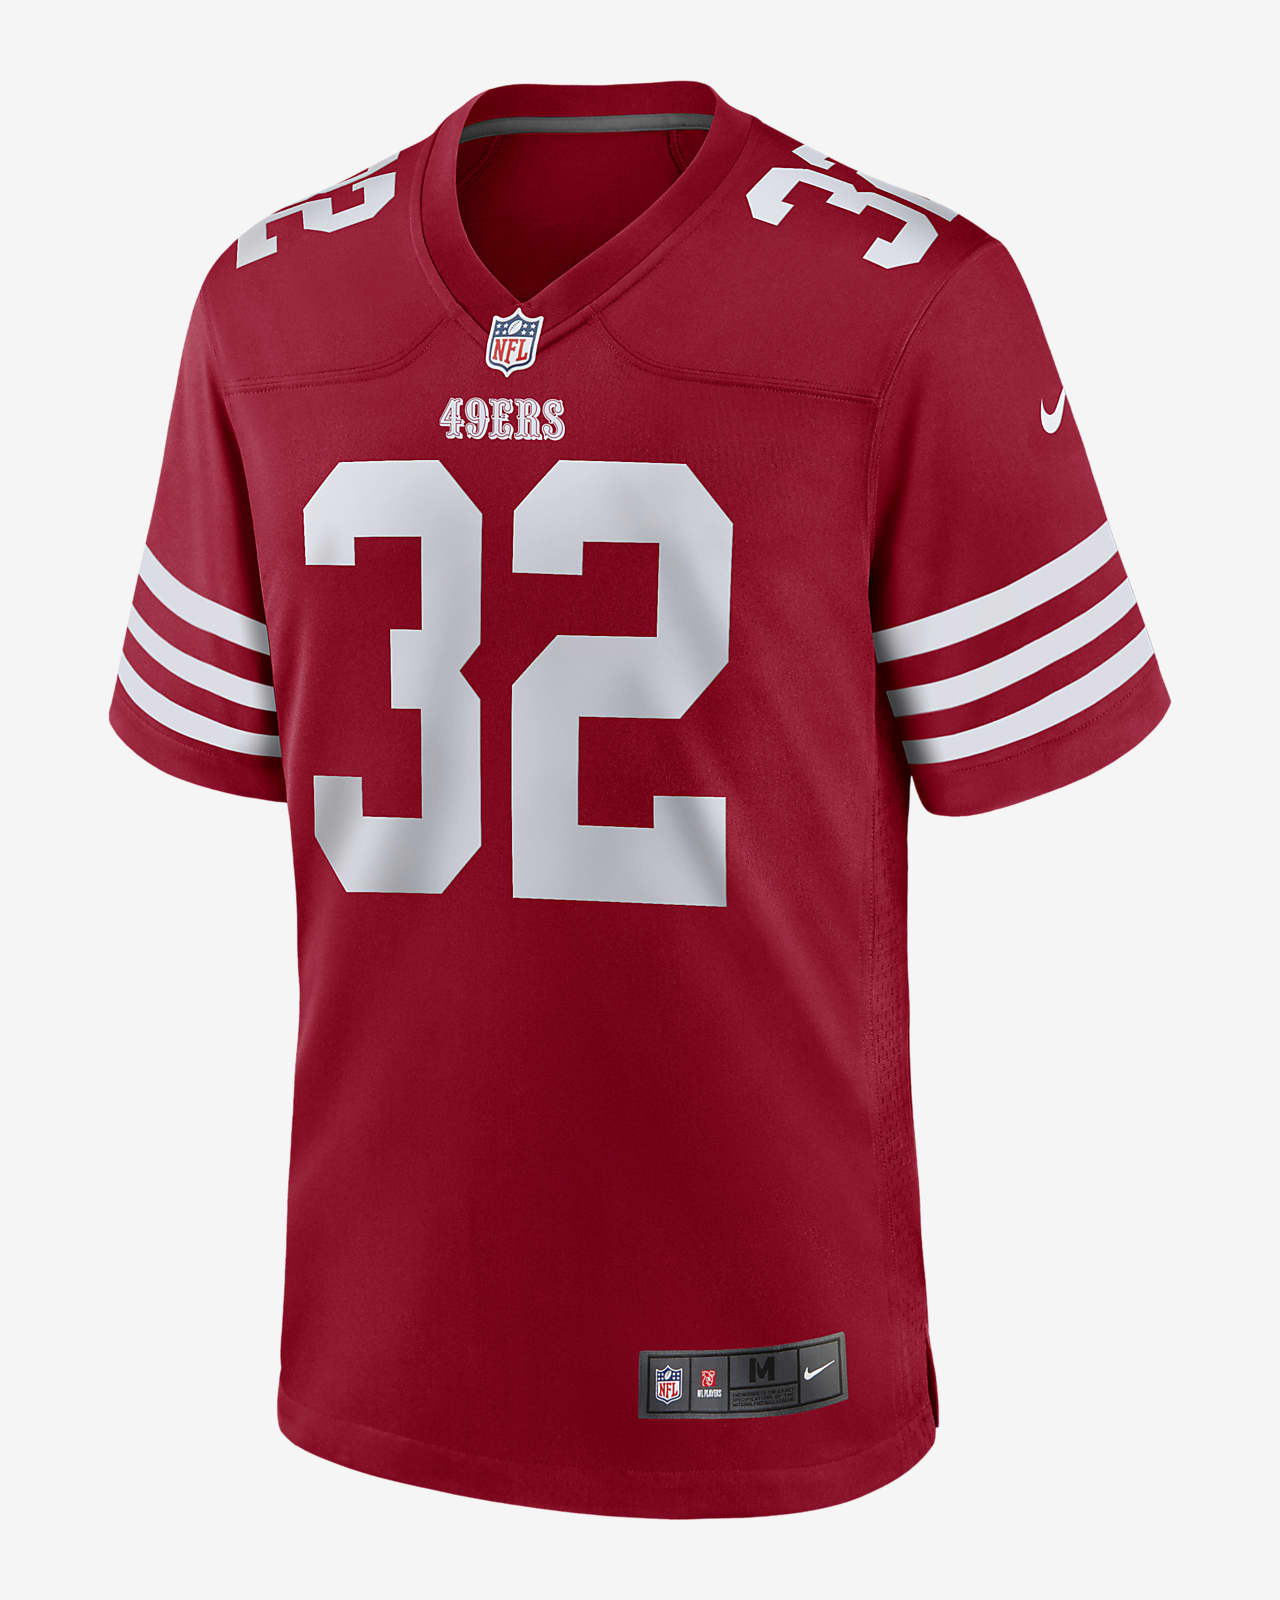 NFL San Francisco 49ers (Ricky Watters) Men's Game Football Jersey. 